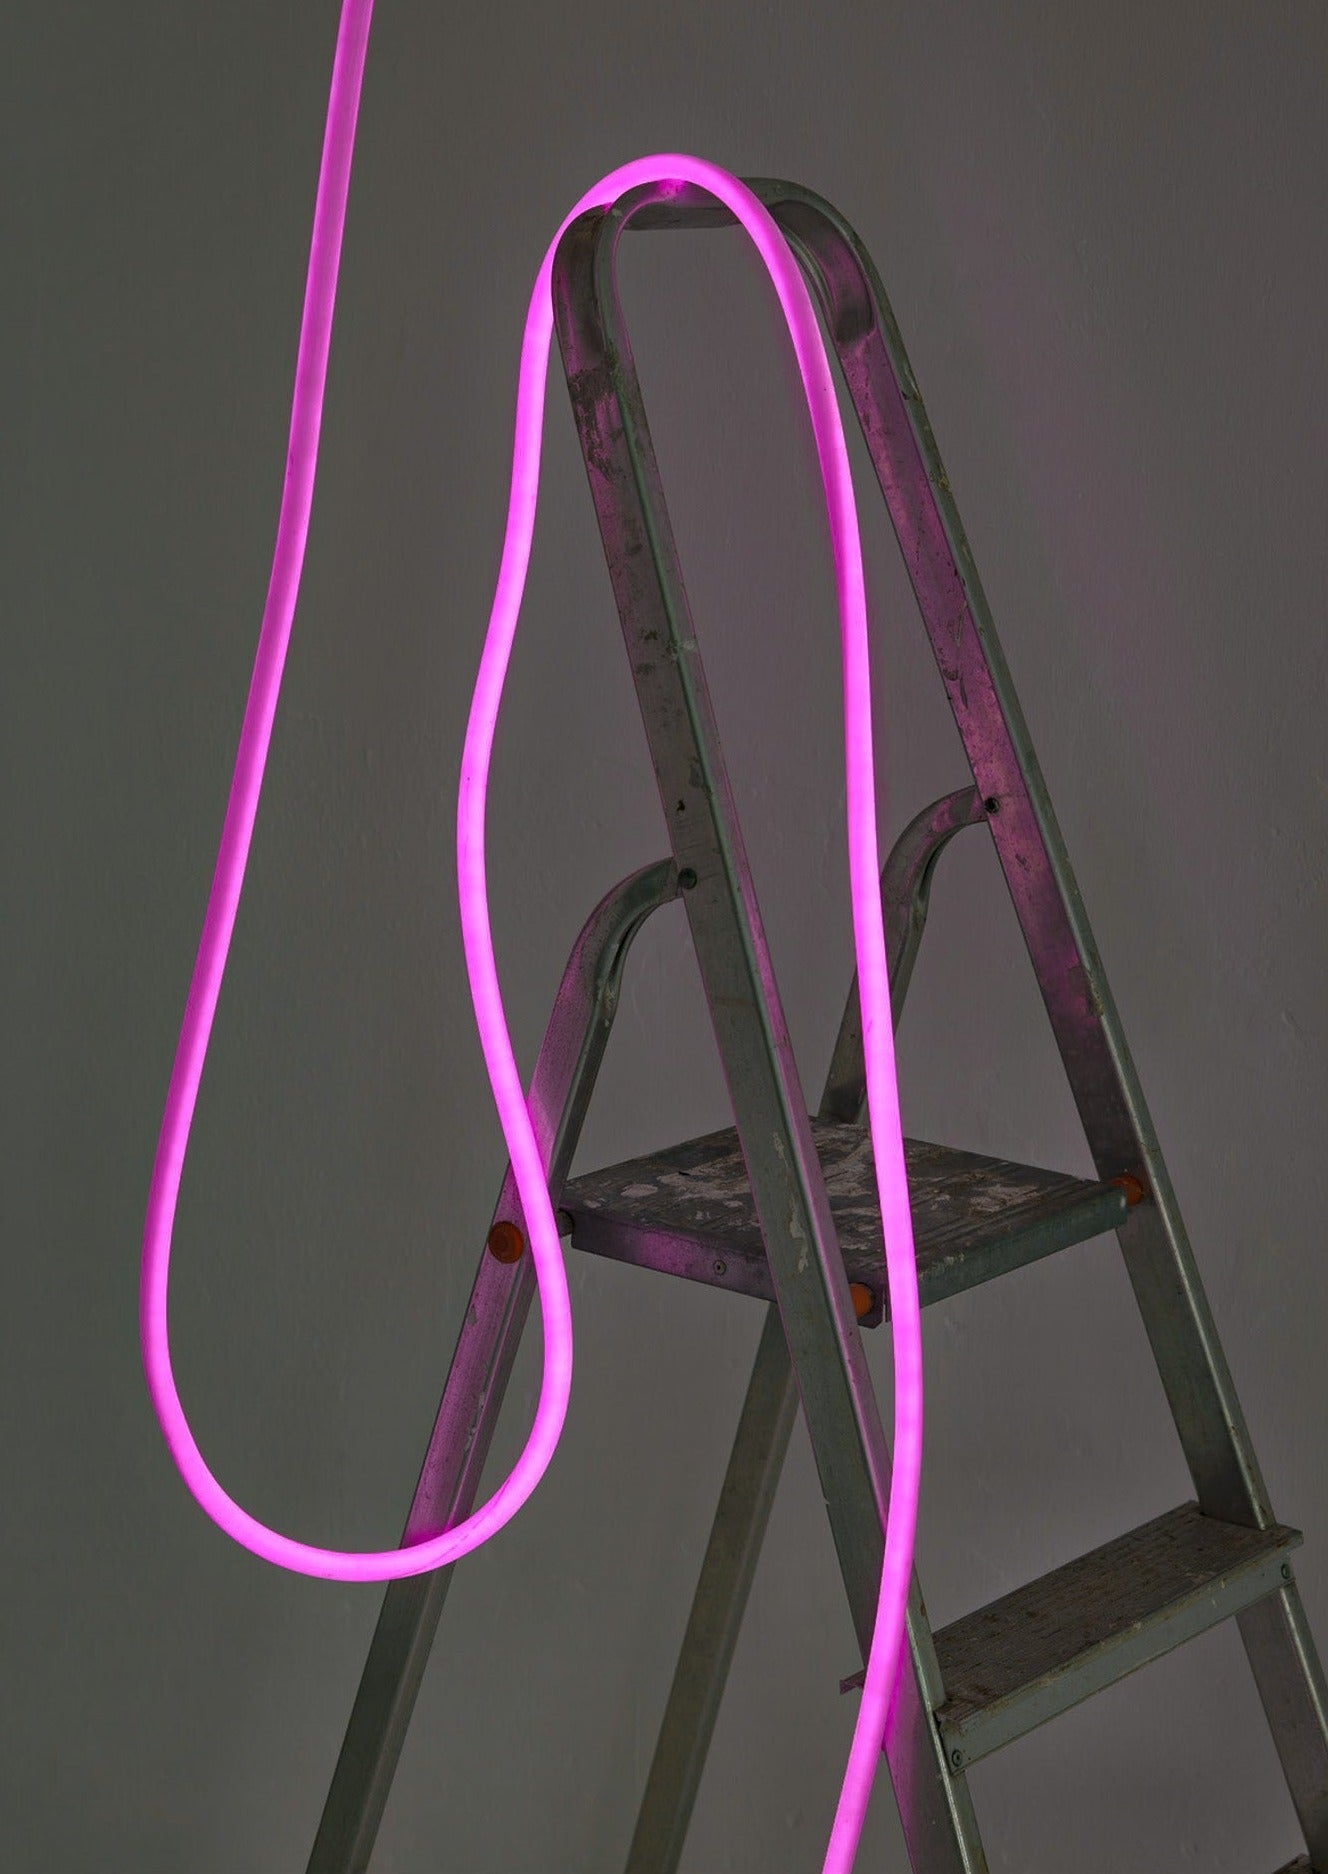 Flex Tube by Studio About - Bright Pink